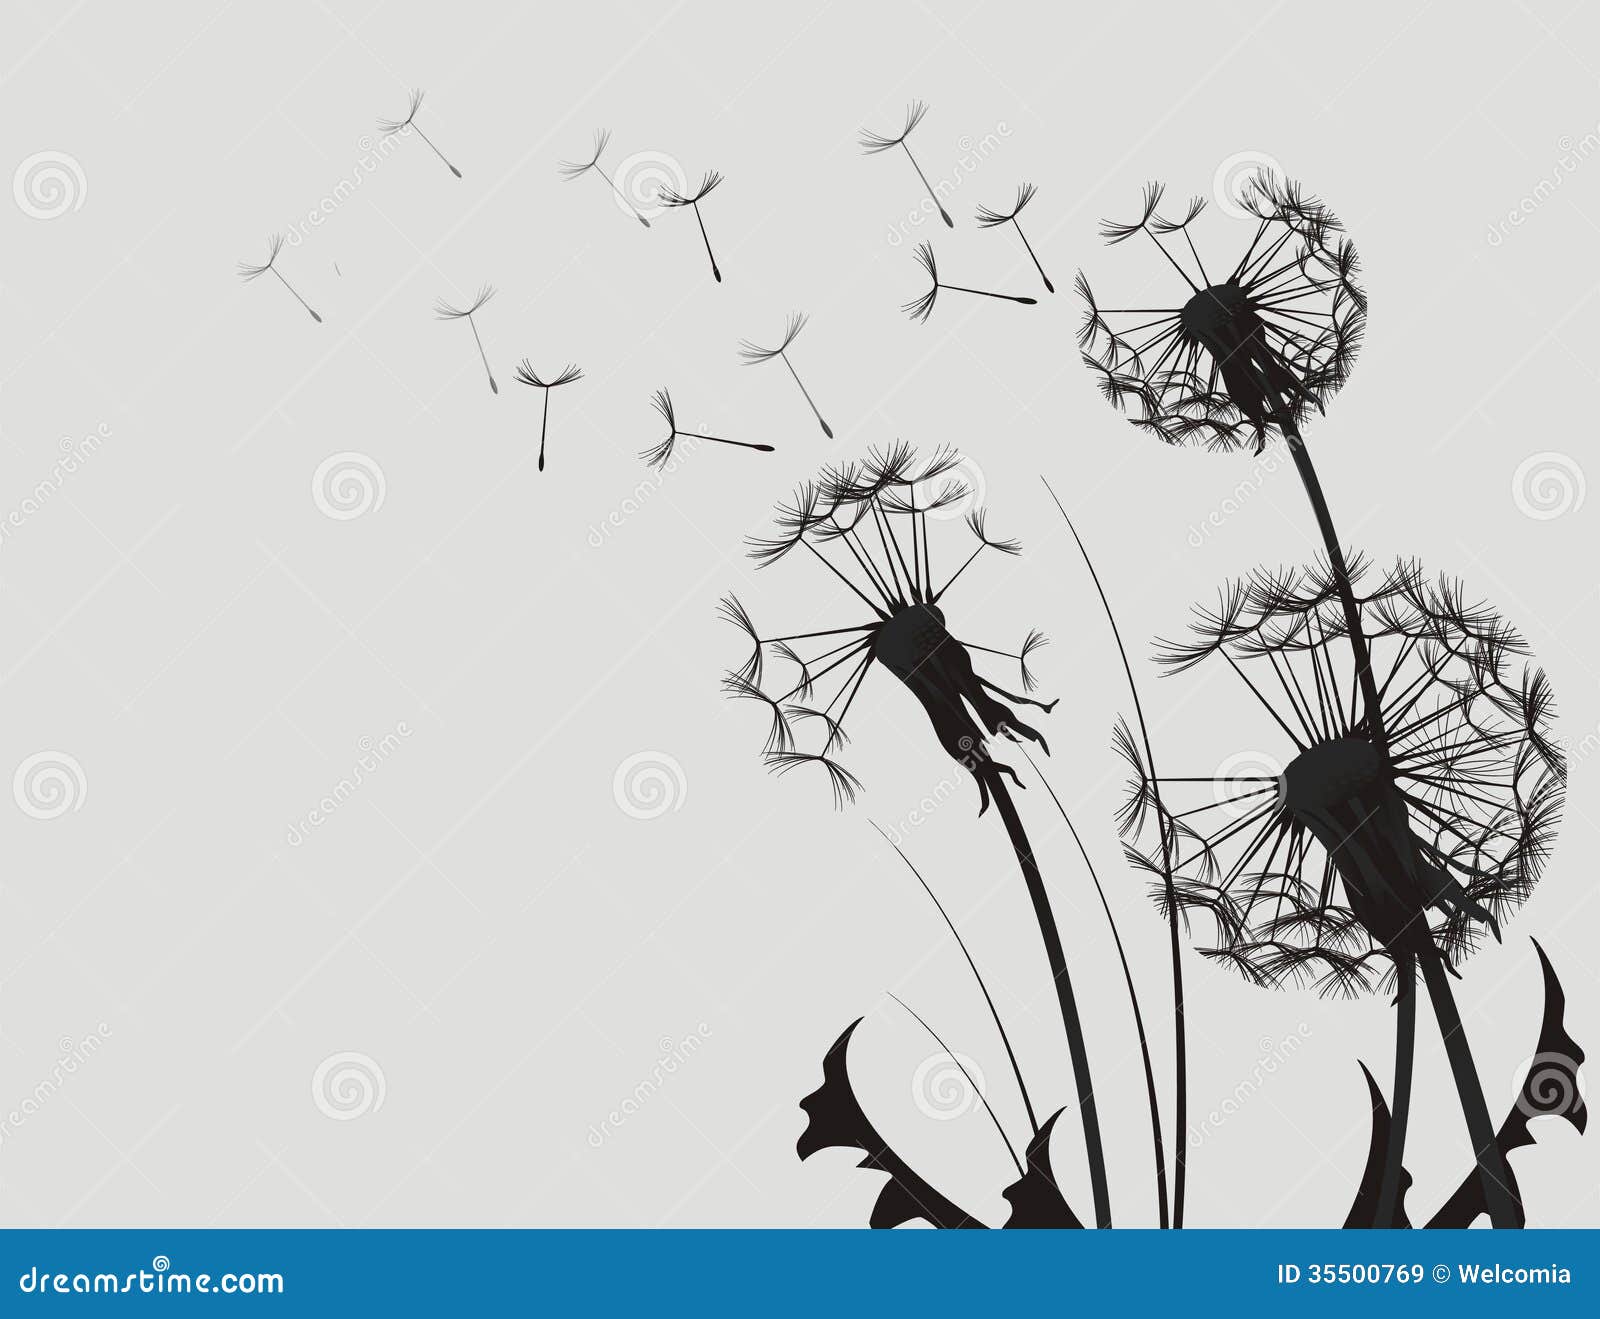 Dandelion Silhouette Royalty Free Stock Images - Image: 35500769